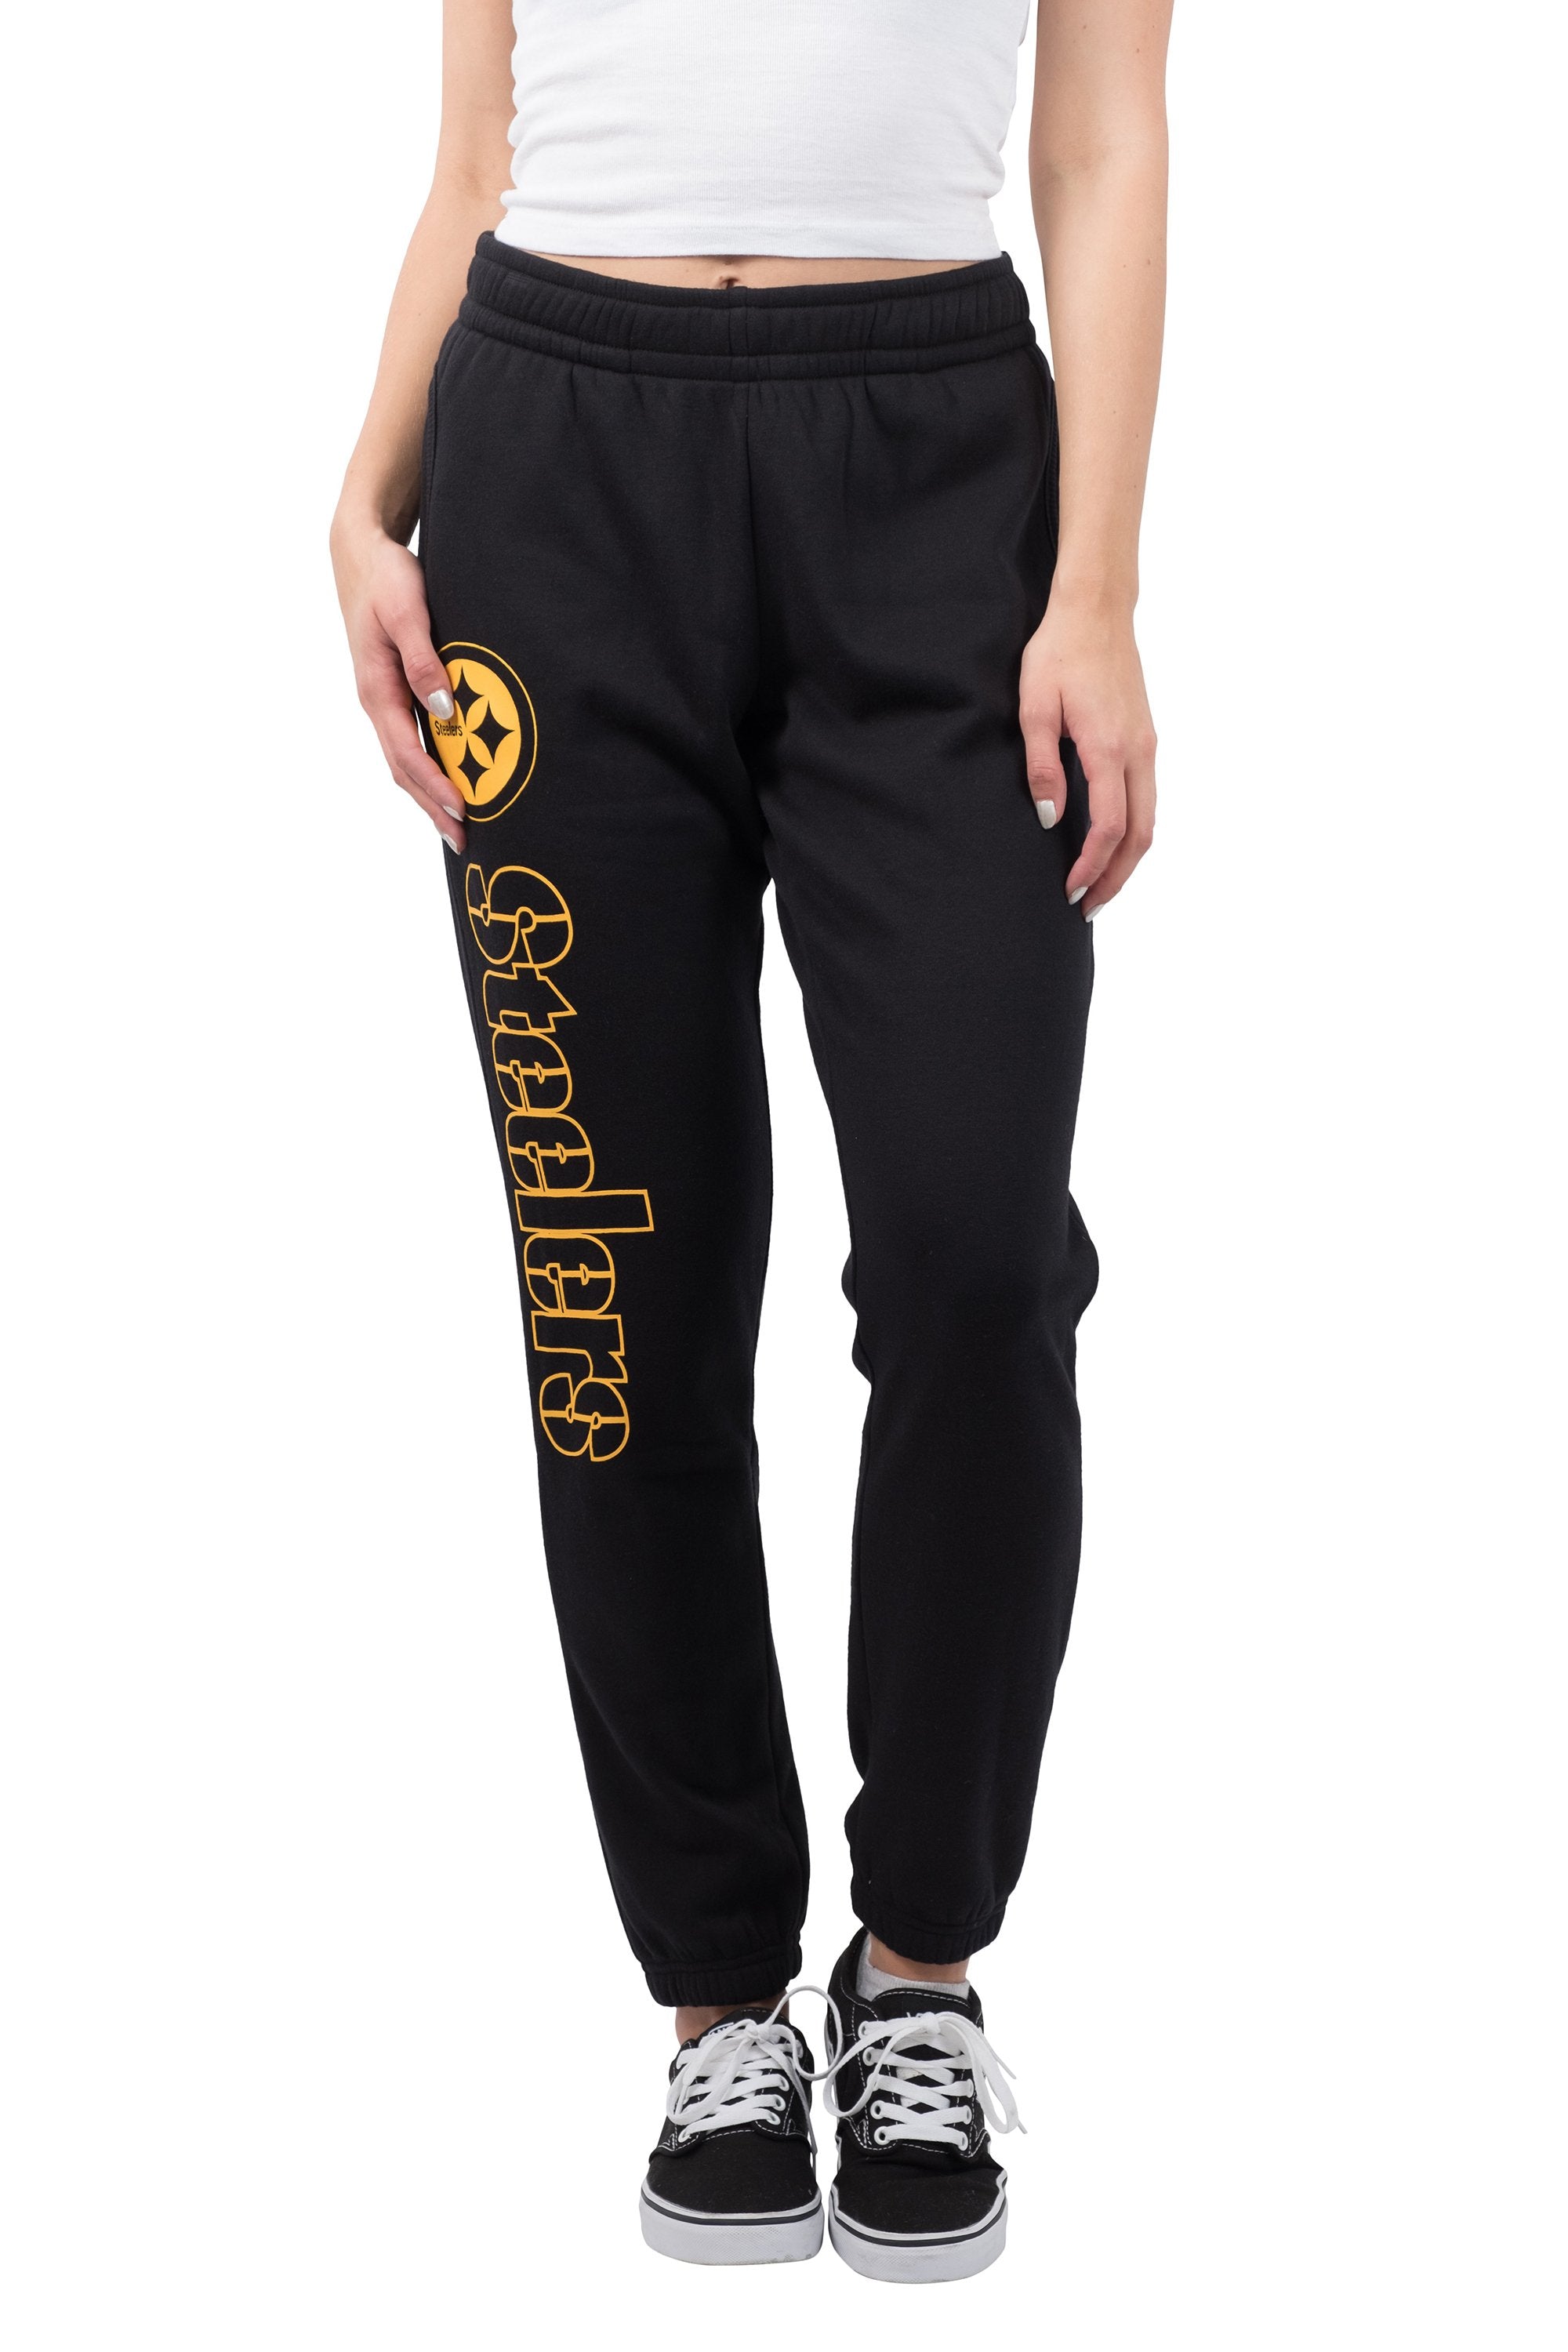 NFL Pittsburgh Steelers Women's Fit Jogger|Pittsburgh Steelers